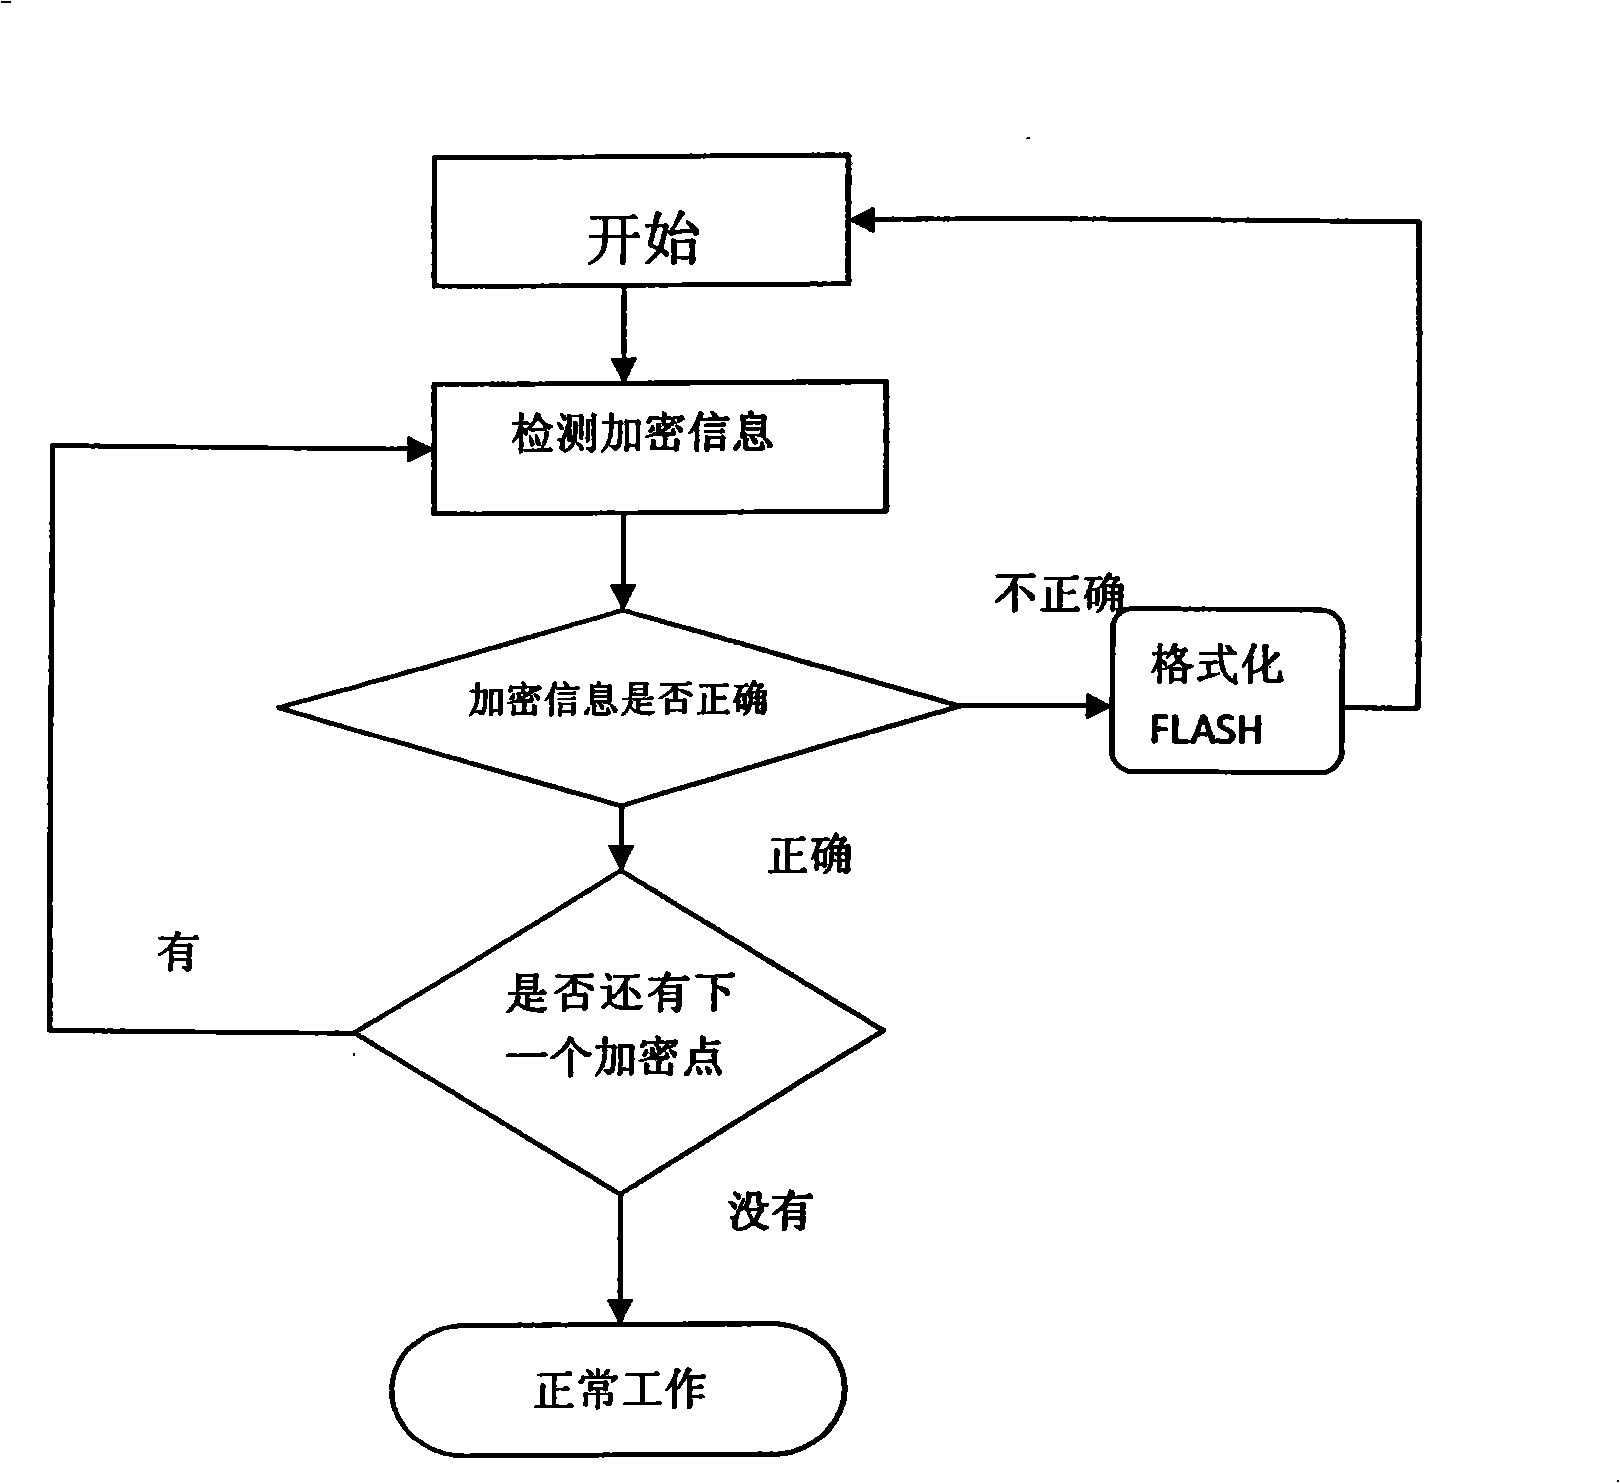 Method for combining encryption to lower computer based on schoolyard card entrance guard system